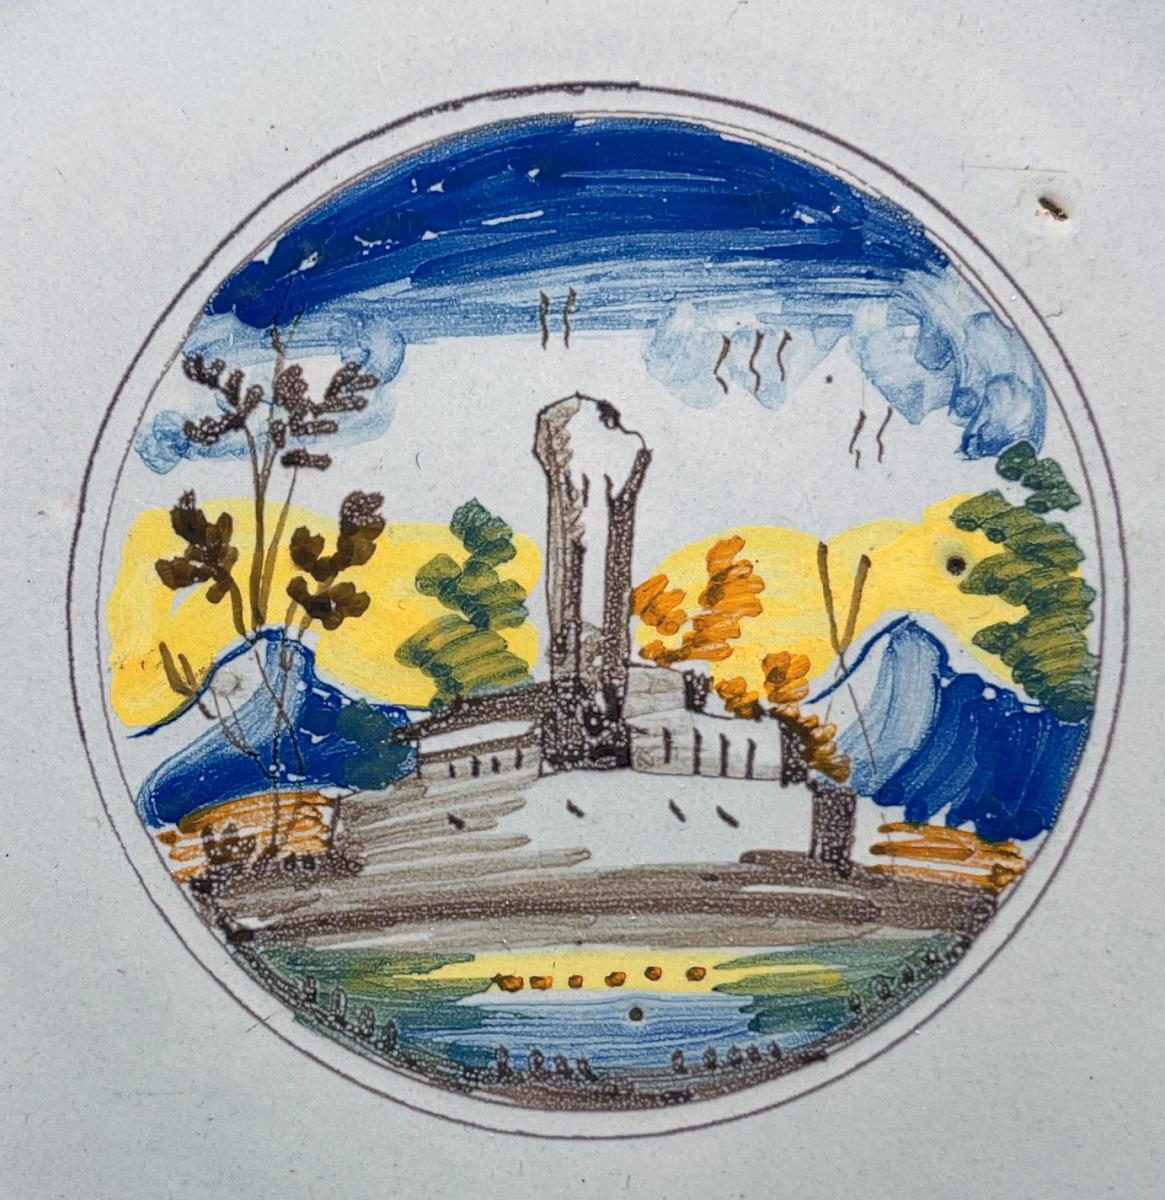 Italian pottery faience plate with painting of a church near mountains circa 1700